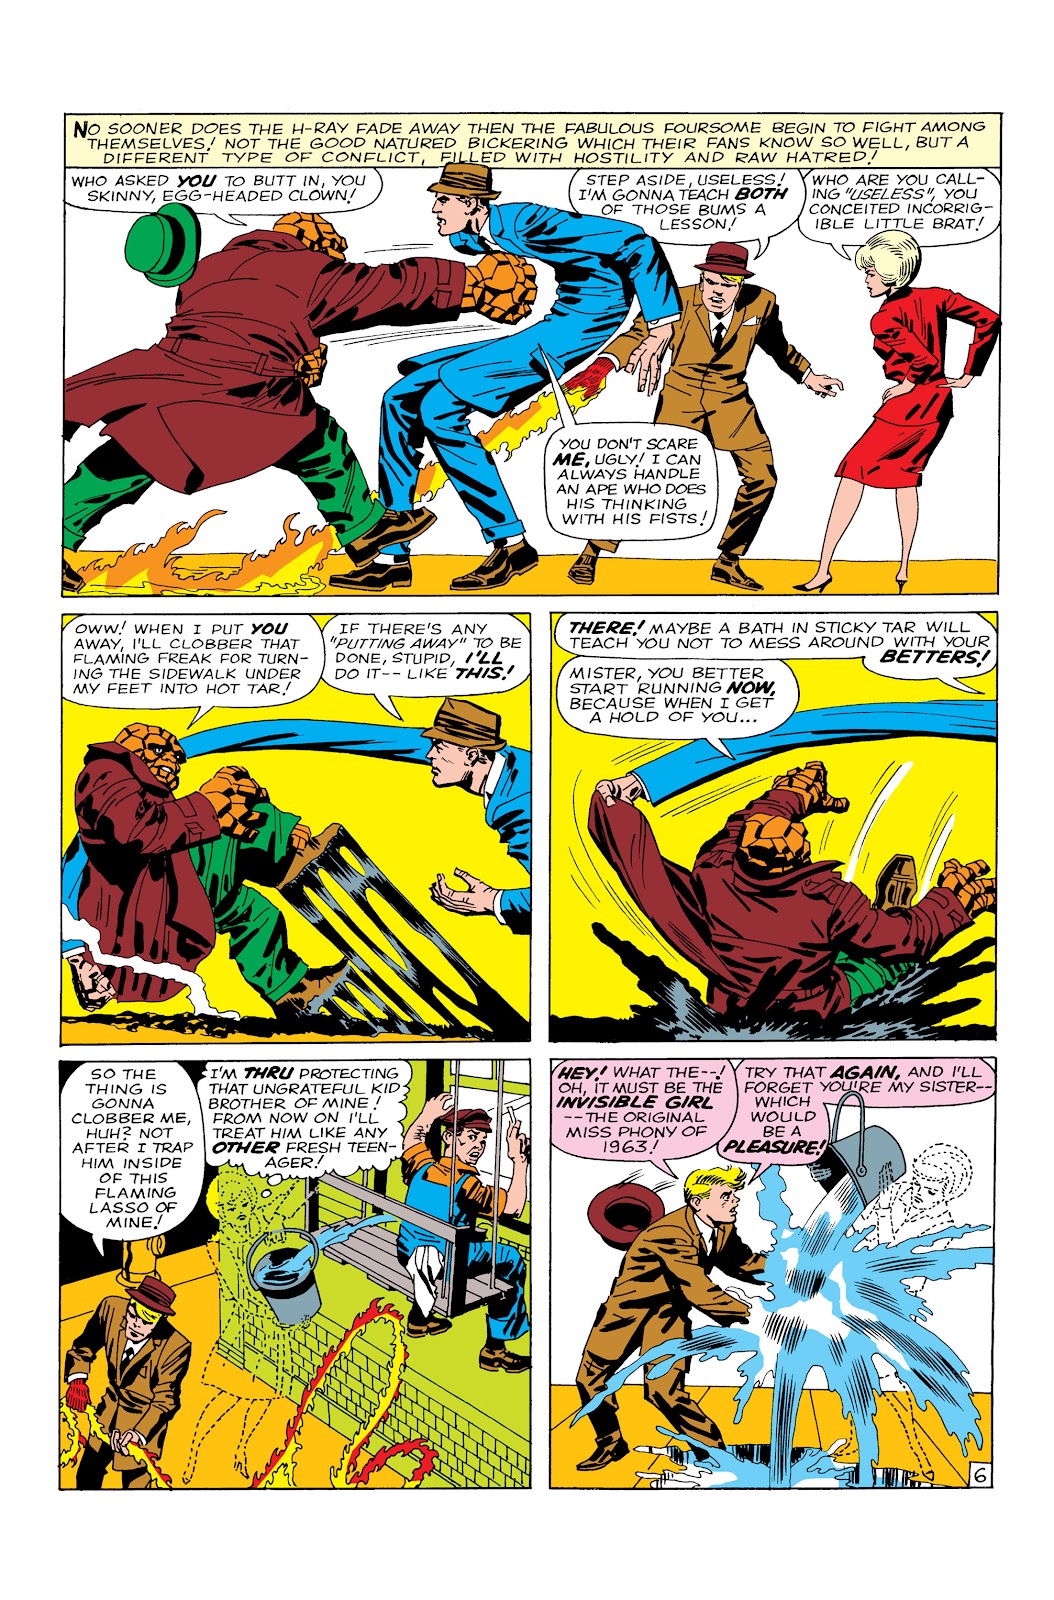 Read online Marvel Masterworks: The Fantastic Four comic - Issue # TPB 3 (Part 1) - 9